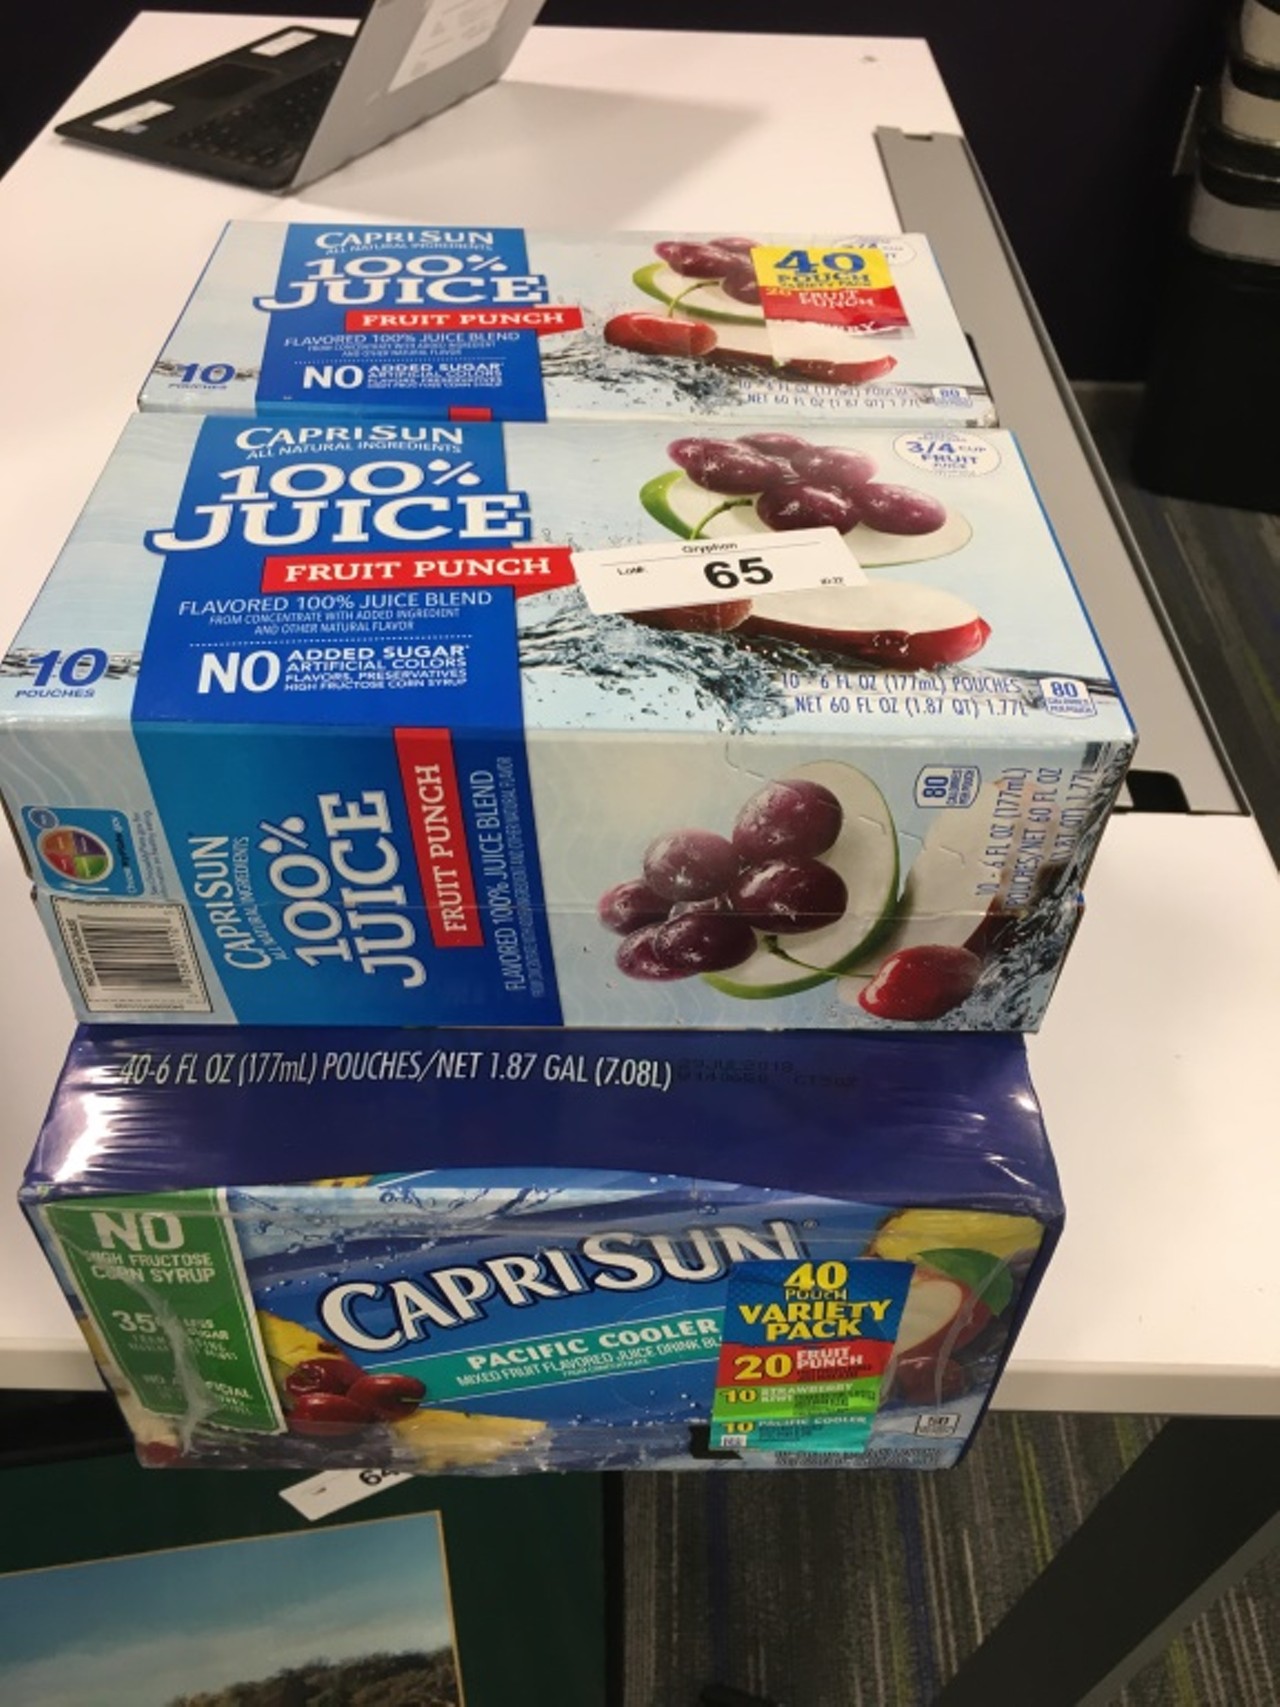 Yup, you can offer up your best price for a boatload of Capri Sun.